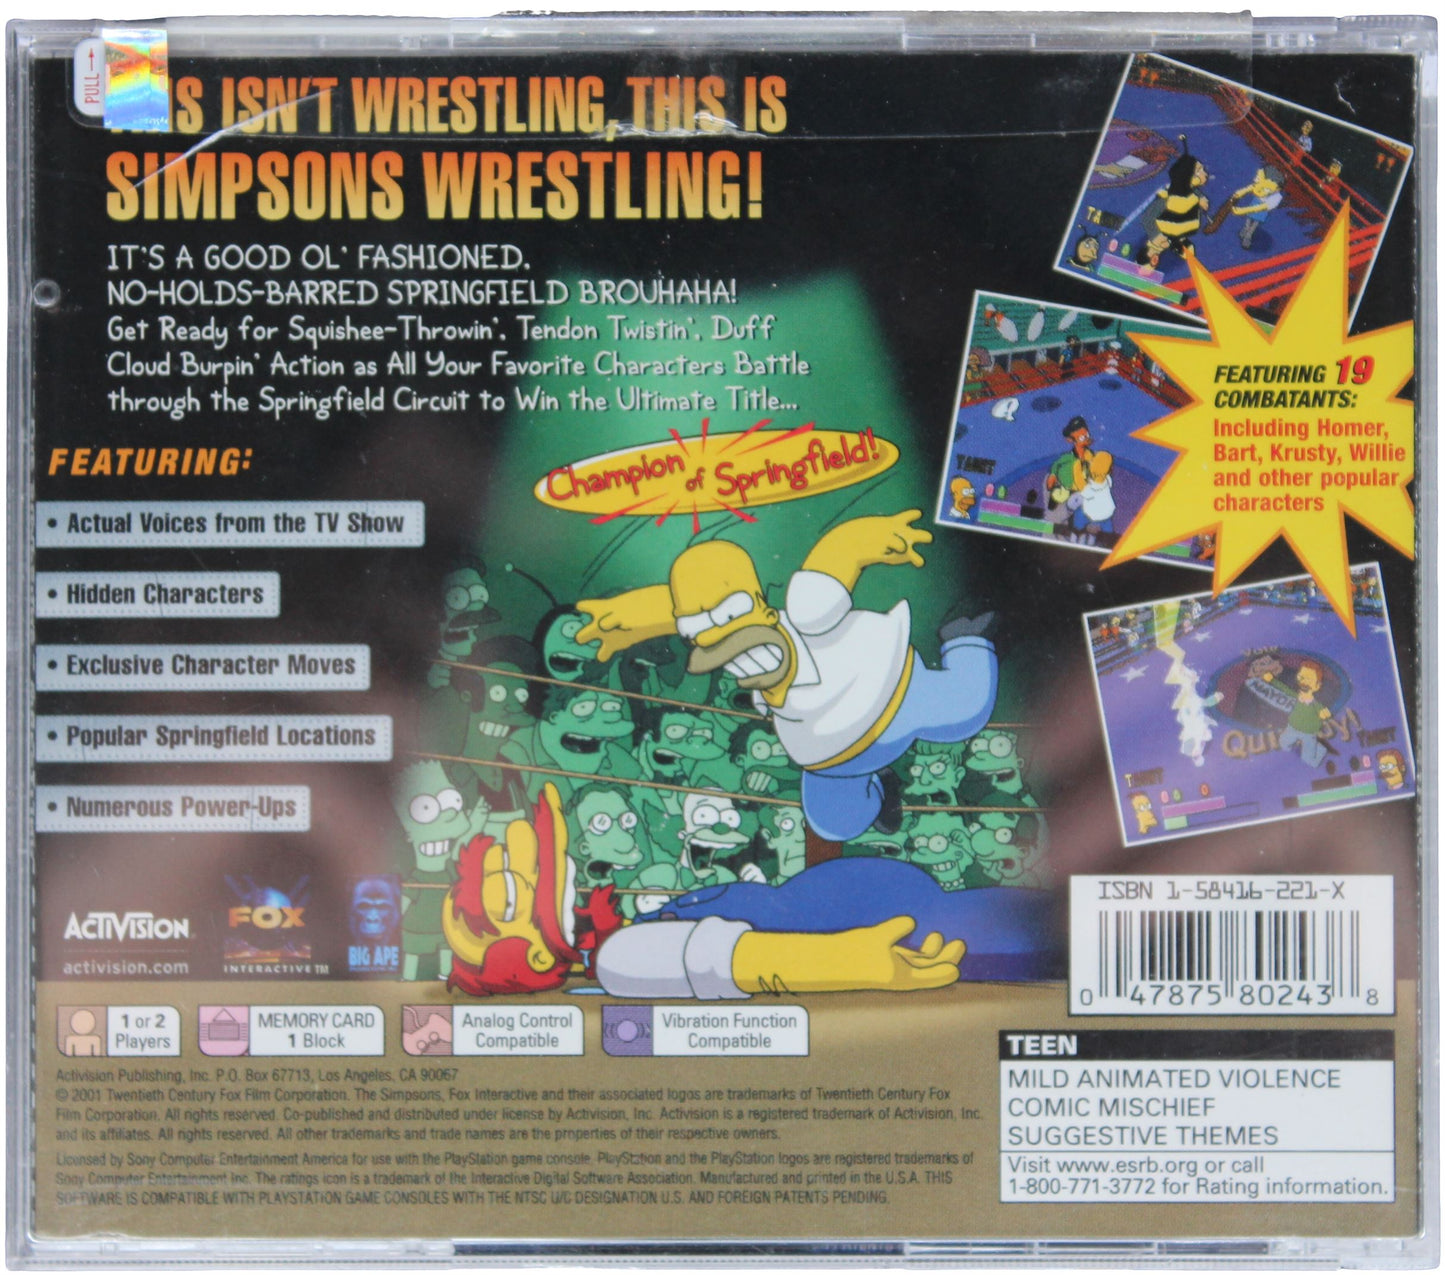 The Simpsons: Wrestling